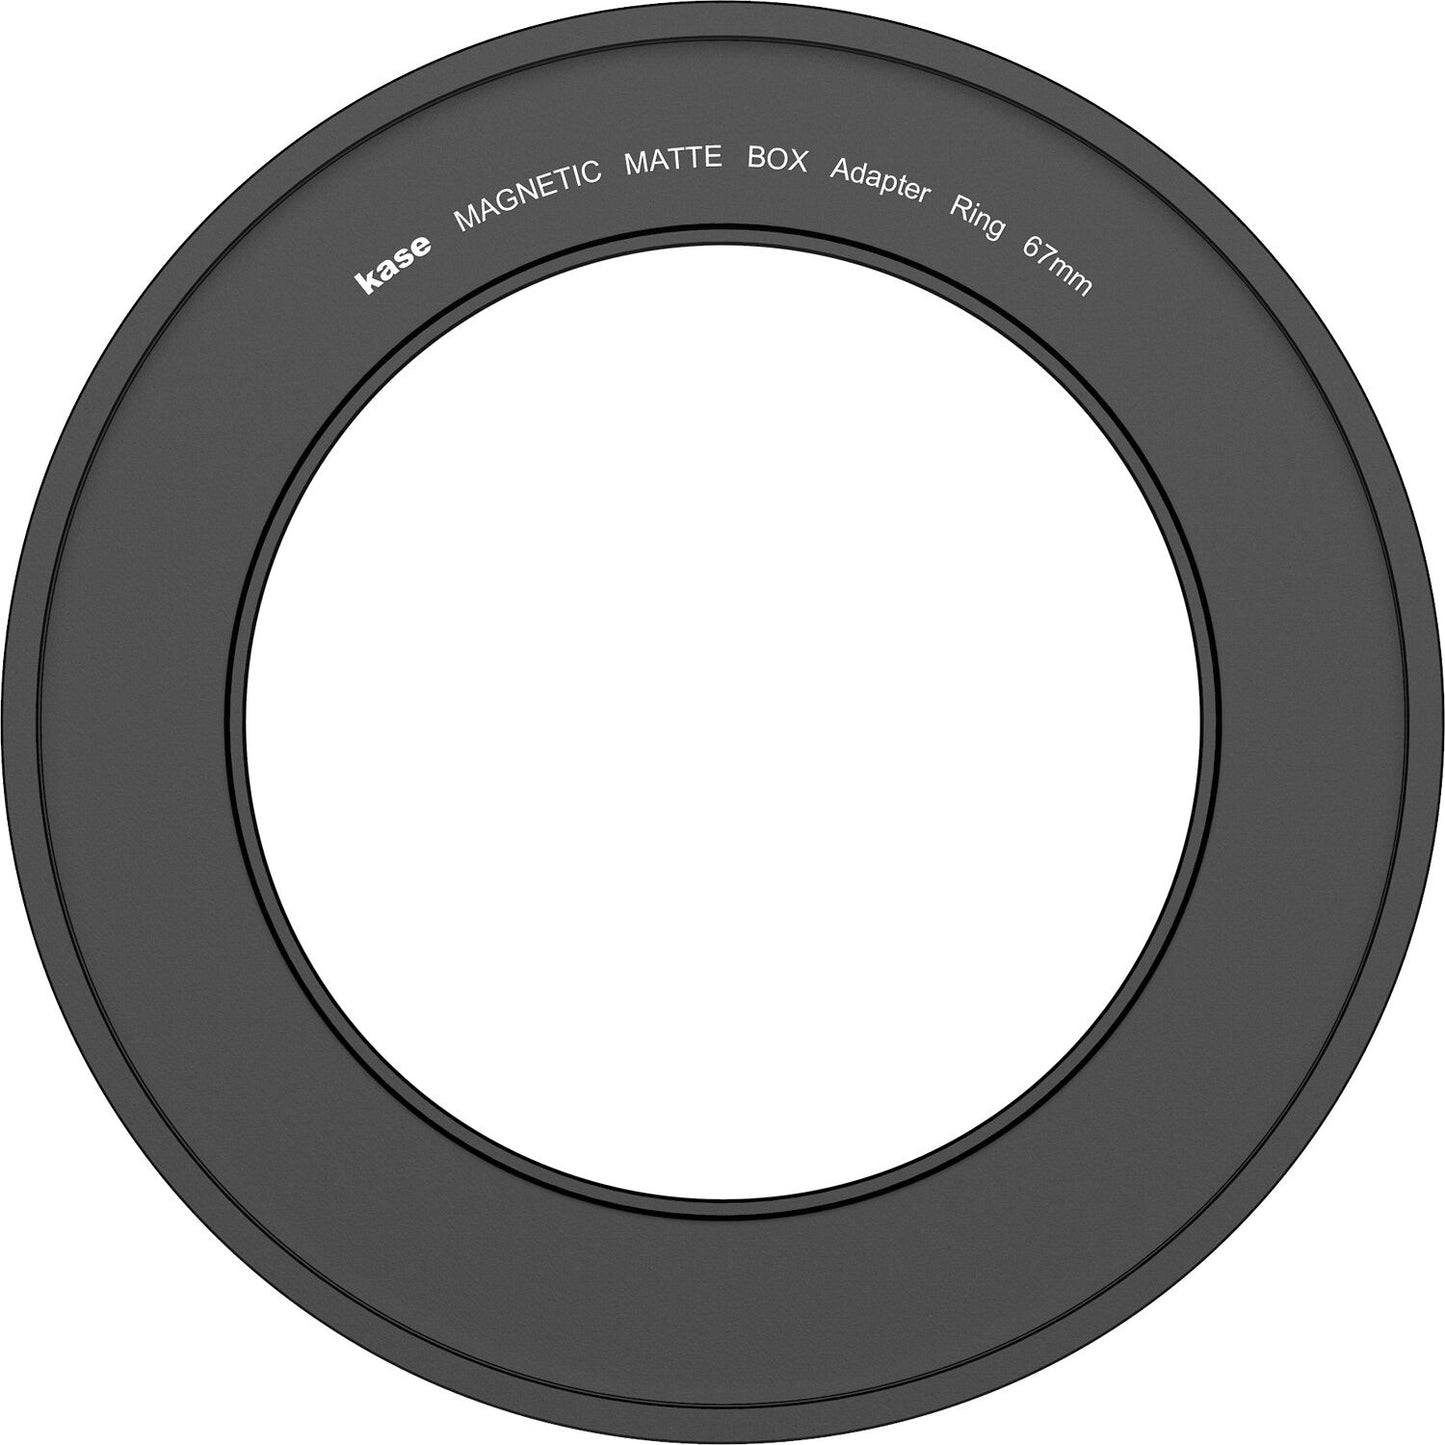 Kase Adapter Ring for MovieMate Matte Box 67mm